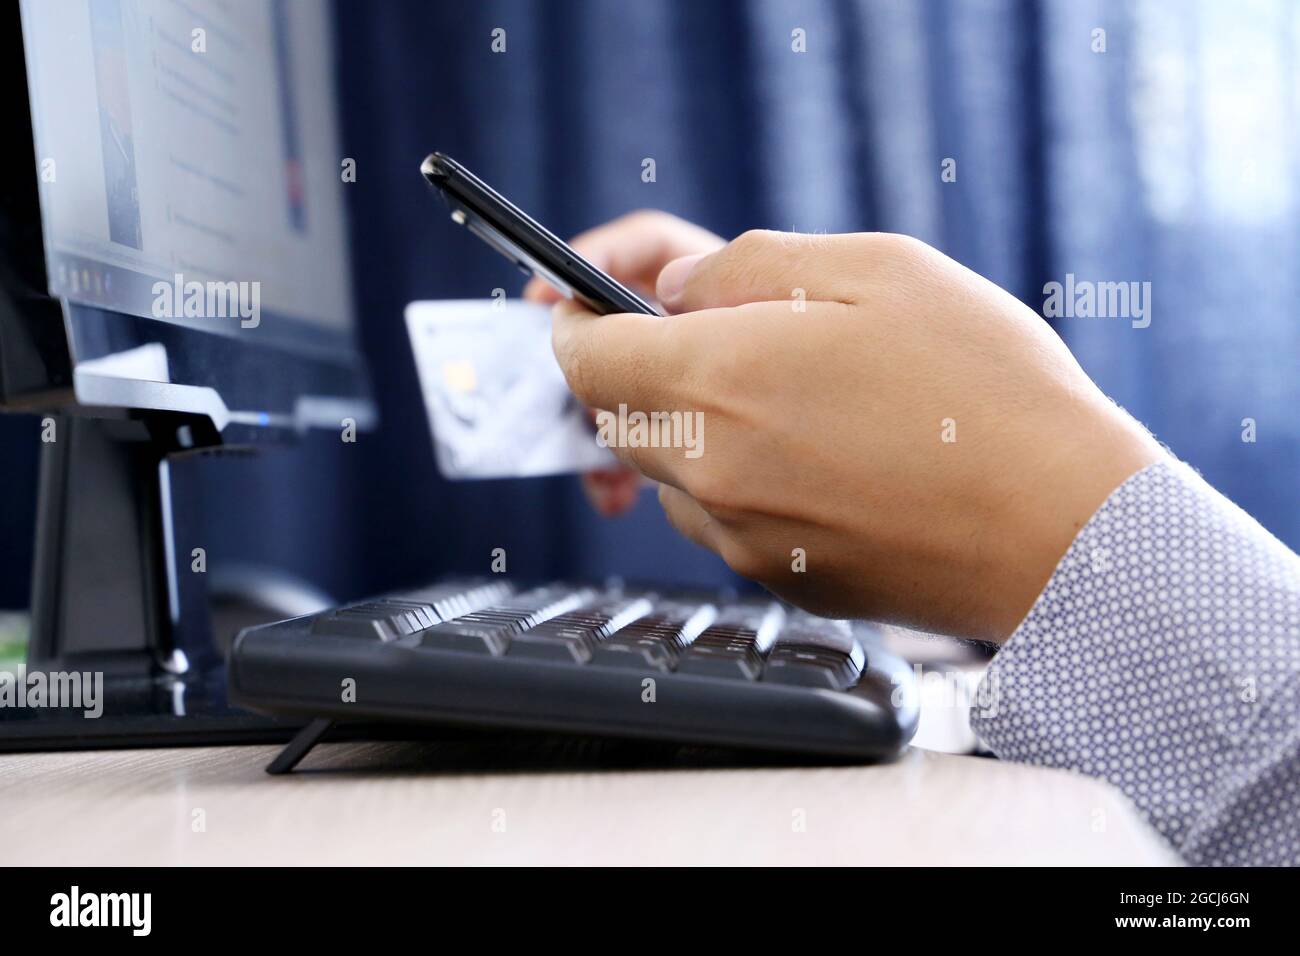 Man holds smartphone and credit card typing on PC keyboard. Concept of online shopping and payment, financial transactions Stock Photo